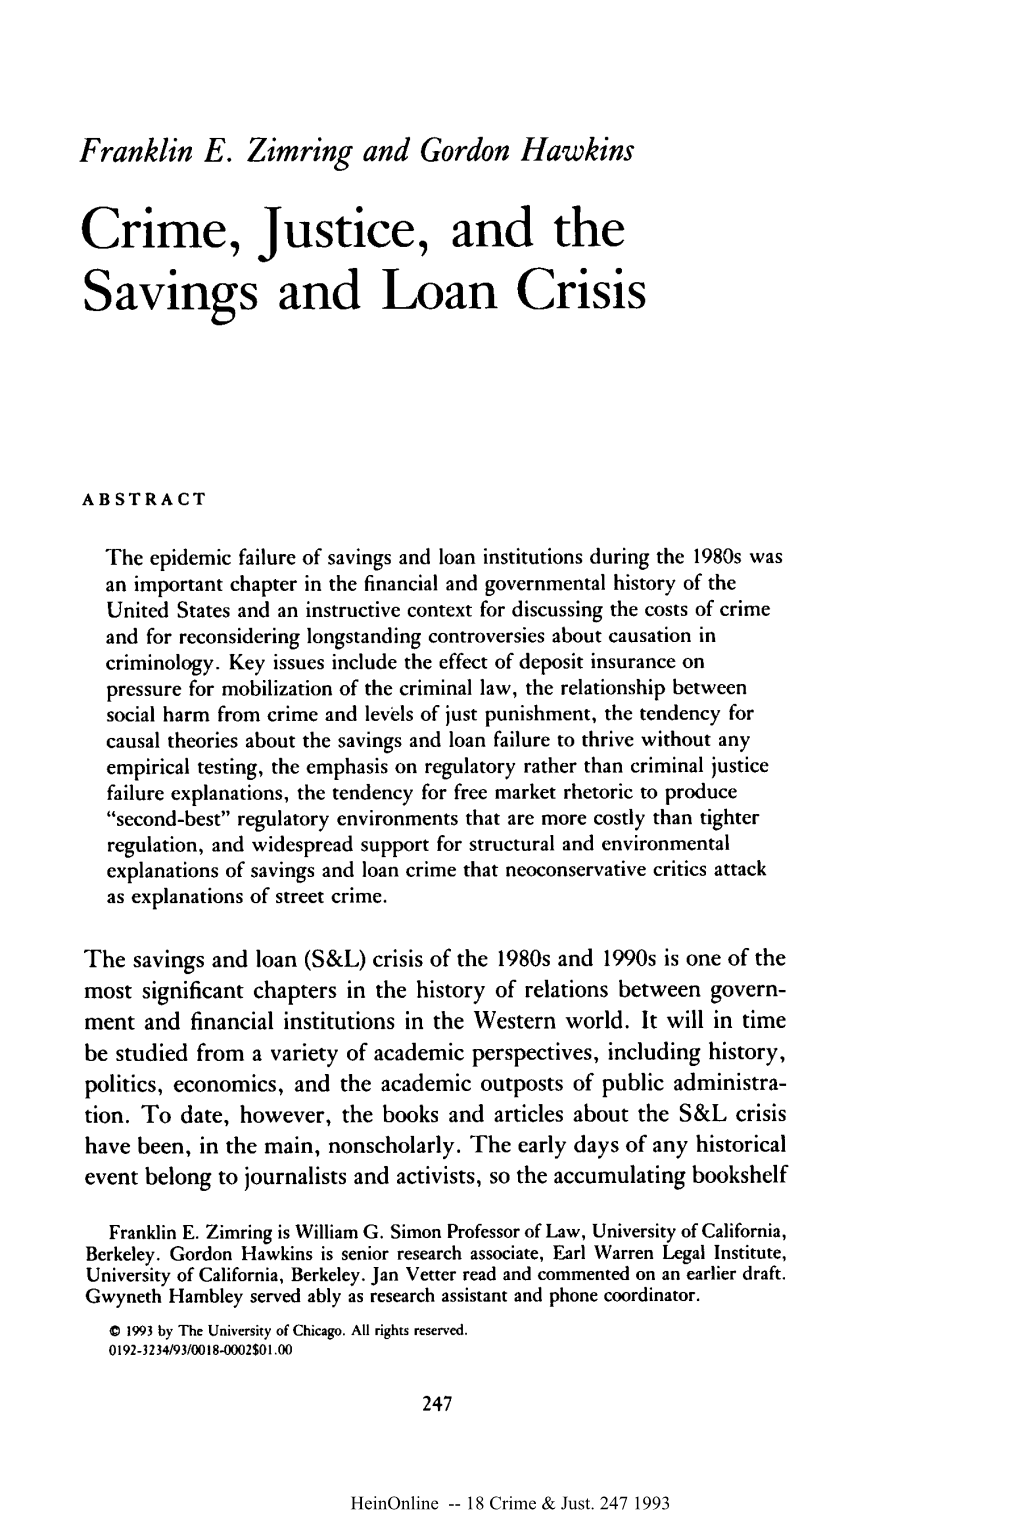 Crime, Justice, and the Savings and Loan Crisis